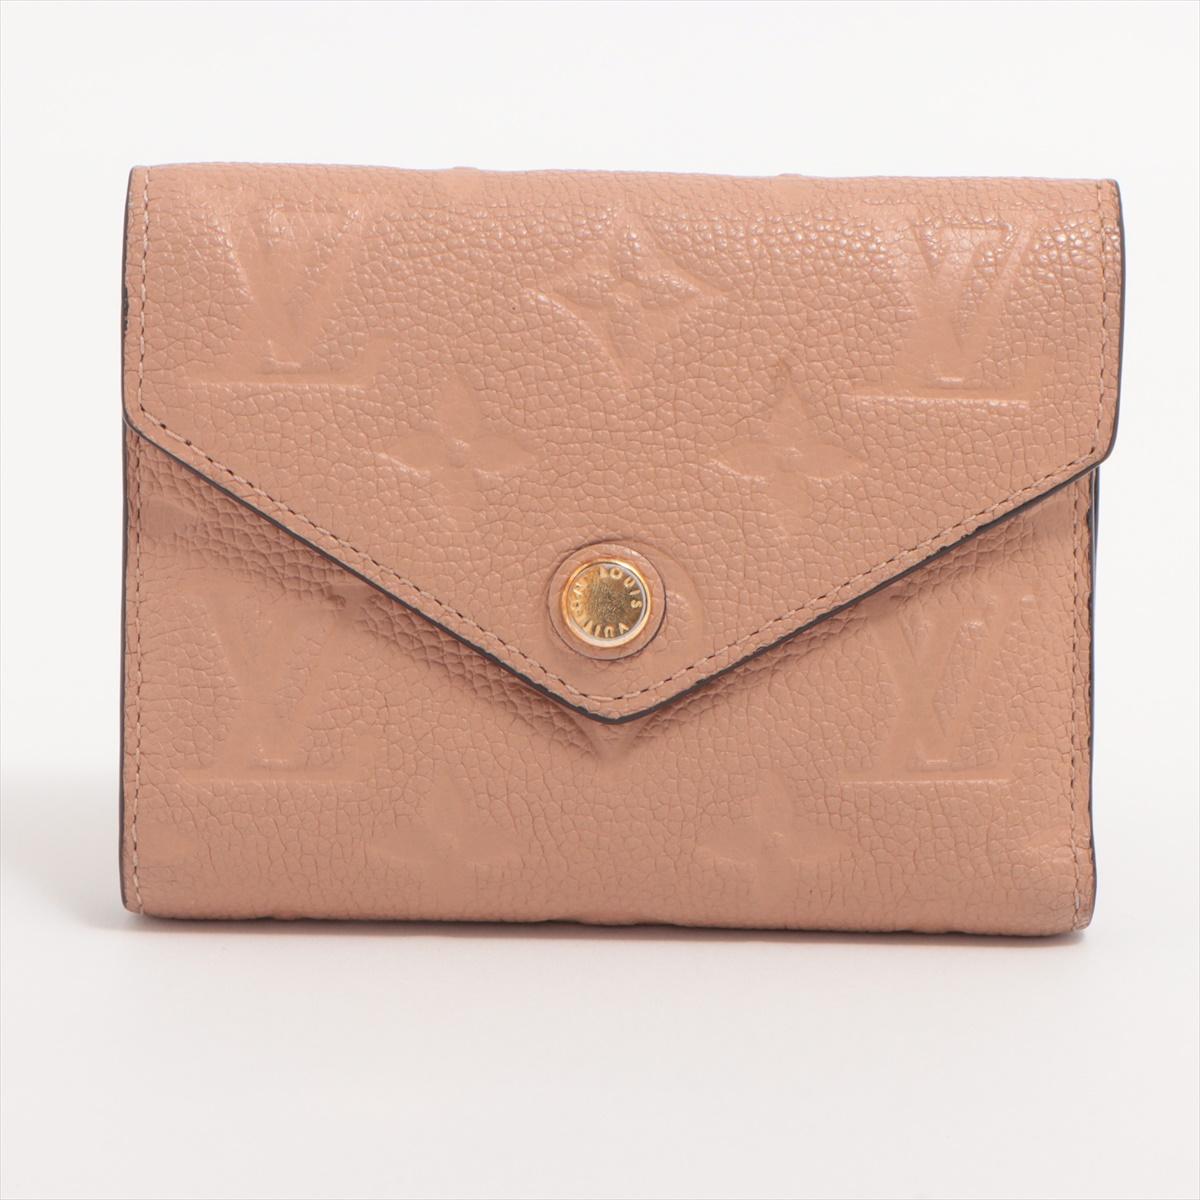 The Louis Vuitton Monogram Empreinte Zoé Wallet in Pink Beige a luxurious and stylish accessory that perfectly blends modern design with the iconic Monogram Empreinte pattern. The wallet features sumptuous pink beige leather embossed with the